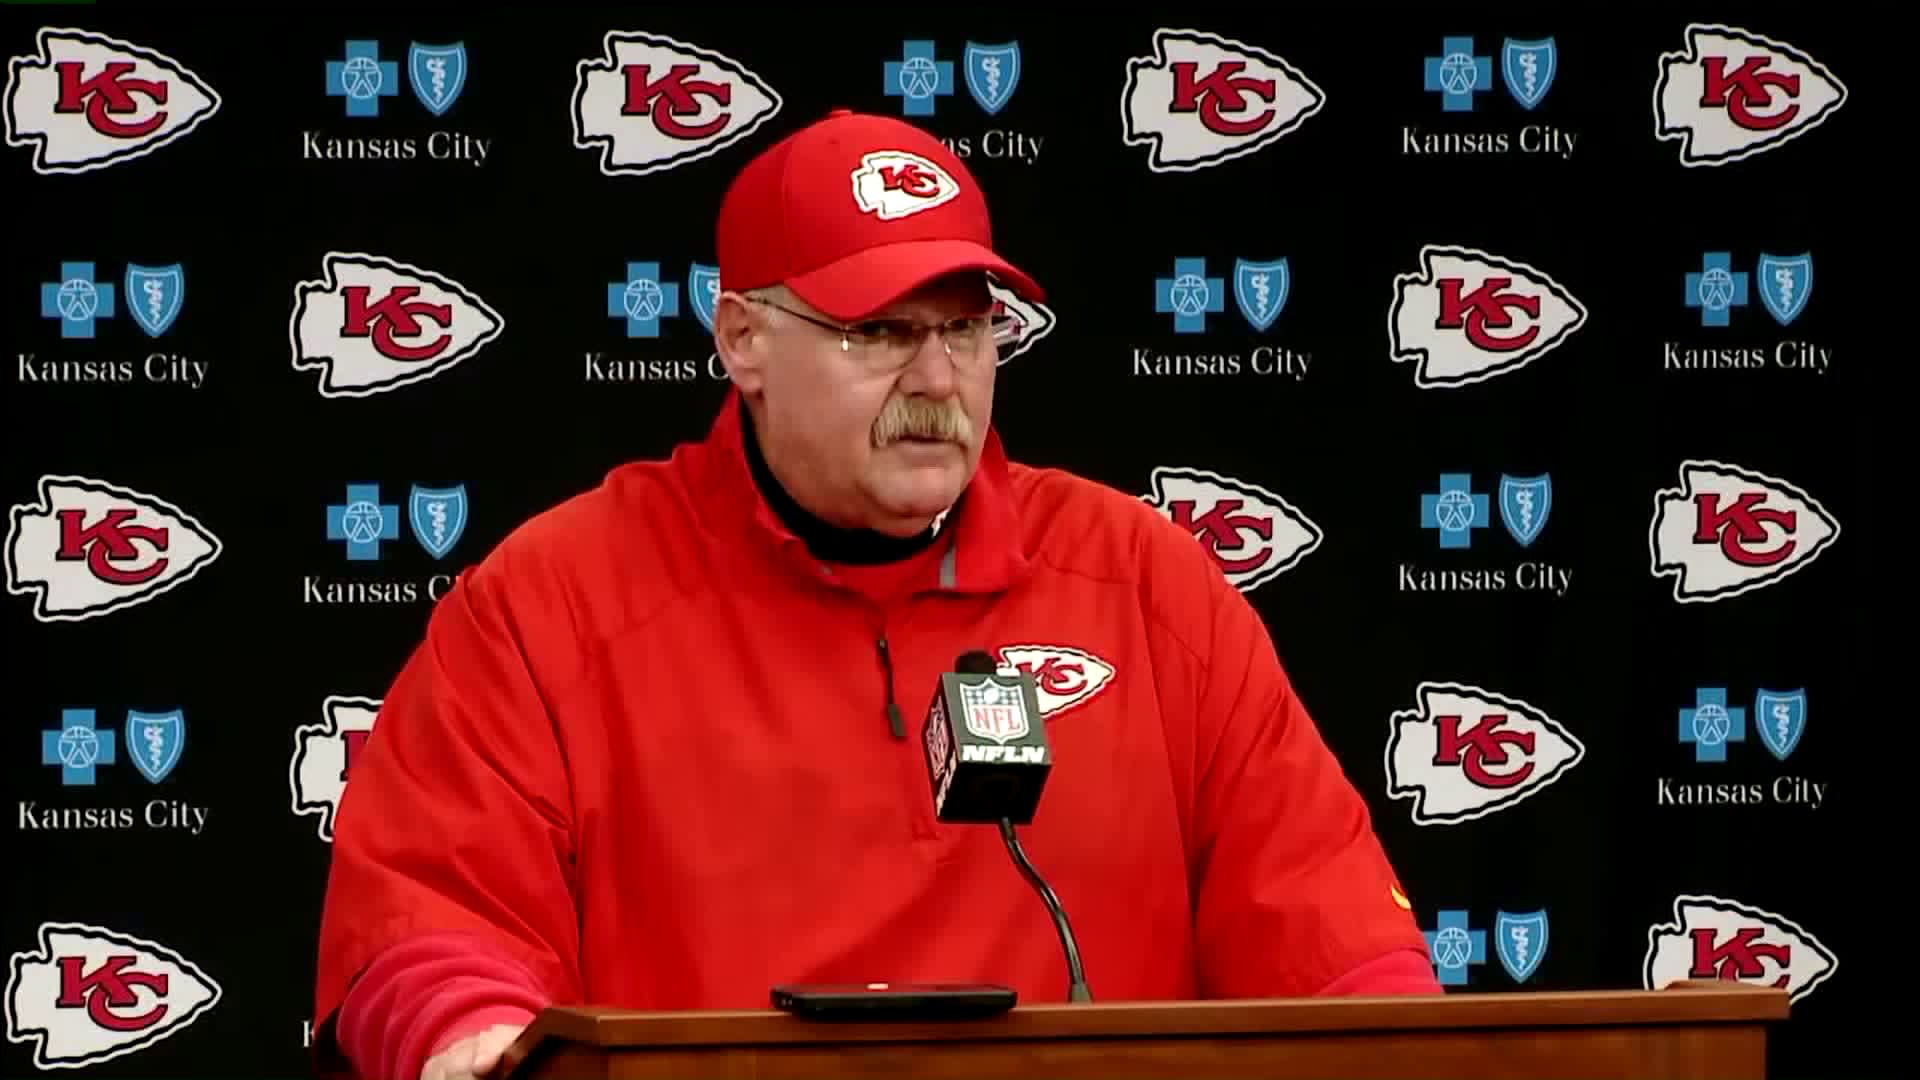 KC Chiefs Head Coach Sends Condolences to Family of Teen Killed in Crash on Way to Game [Video]